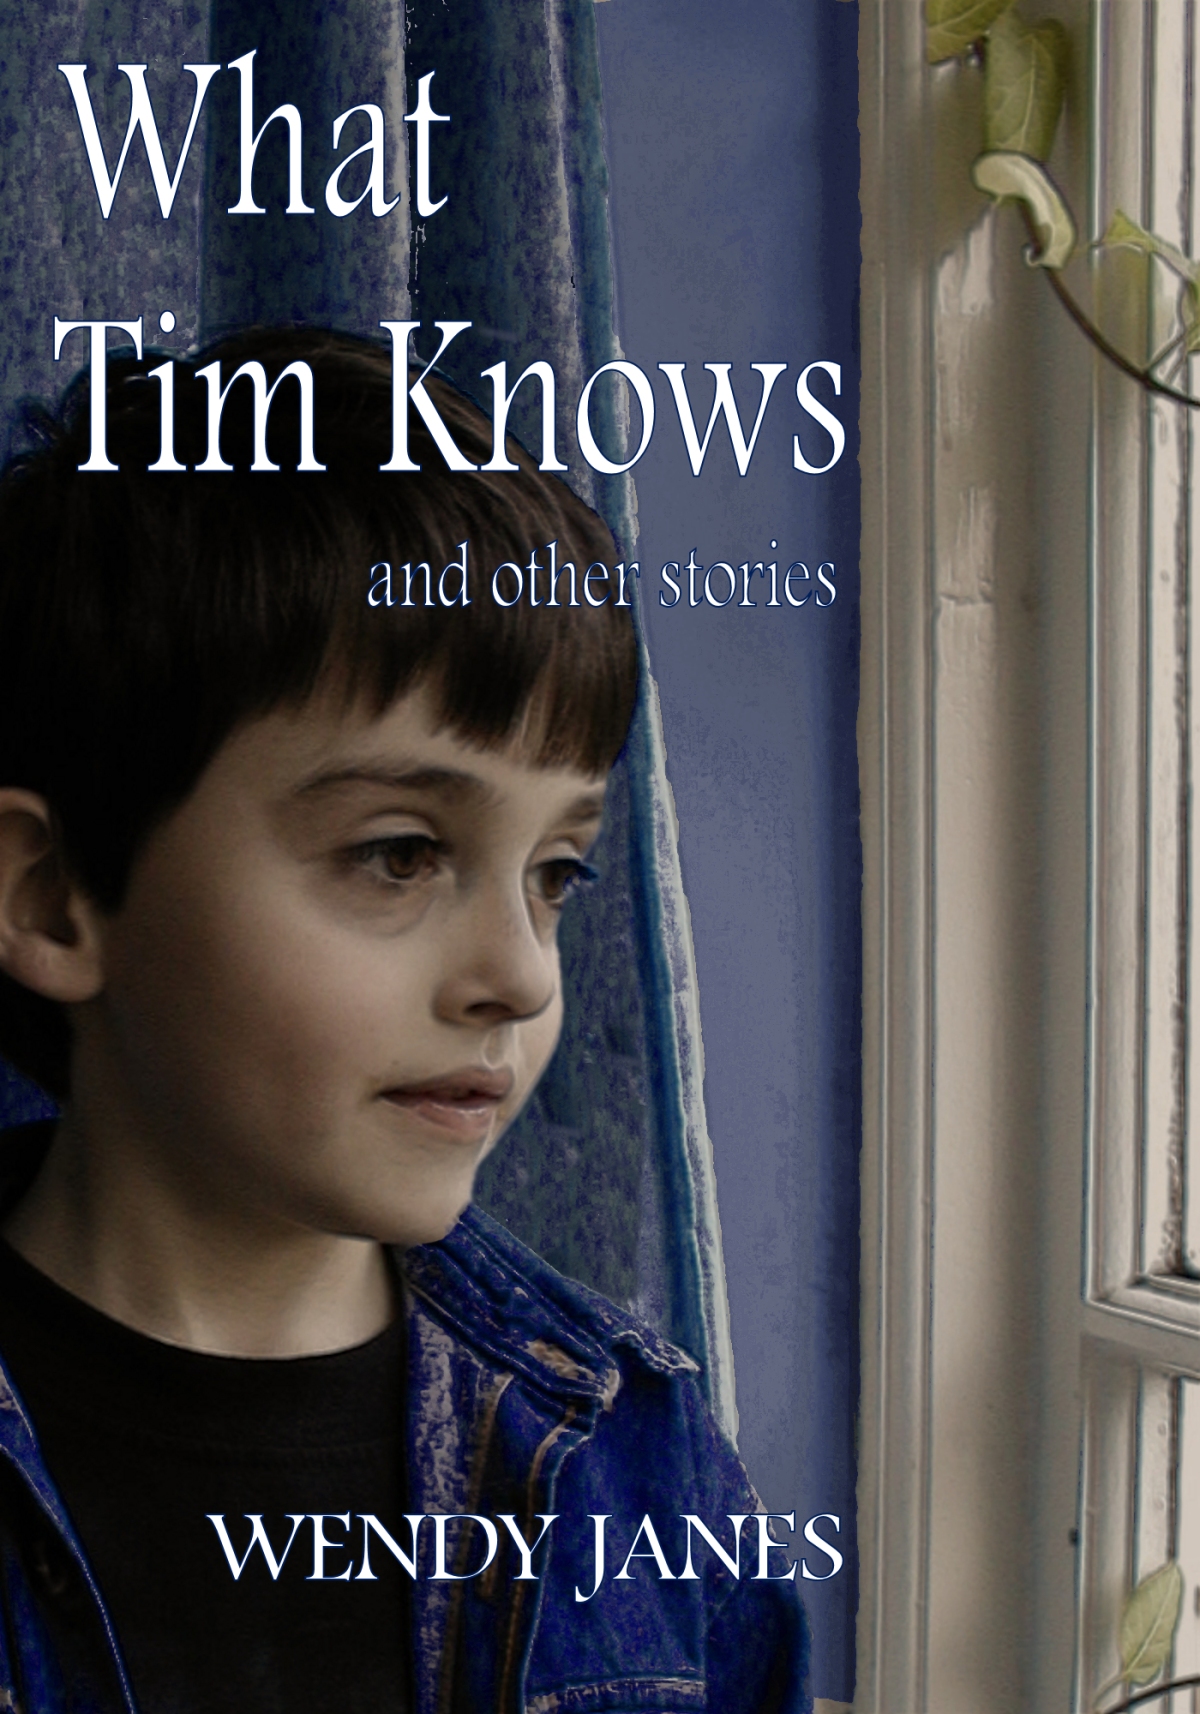 New release: What Tim Knows, and other stories by Wendy Janes